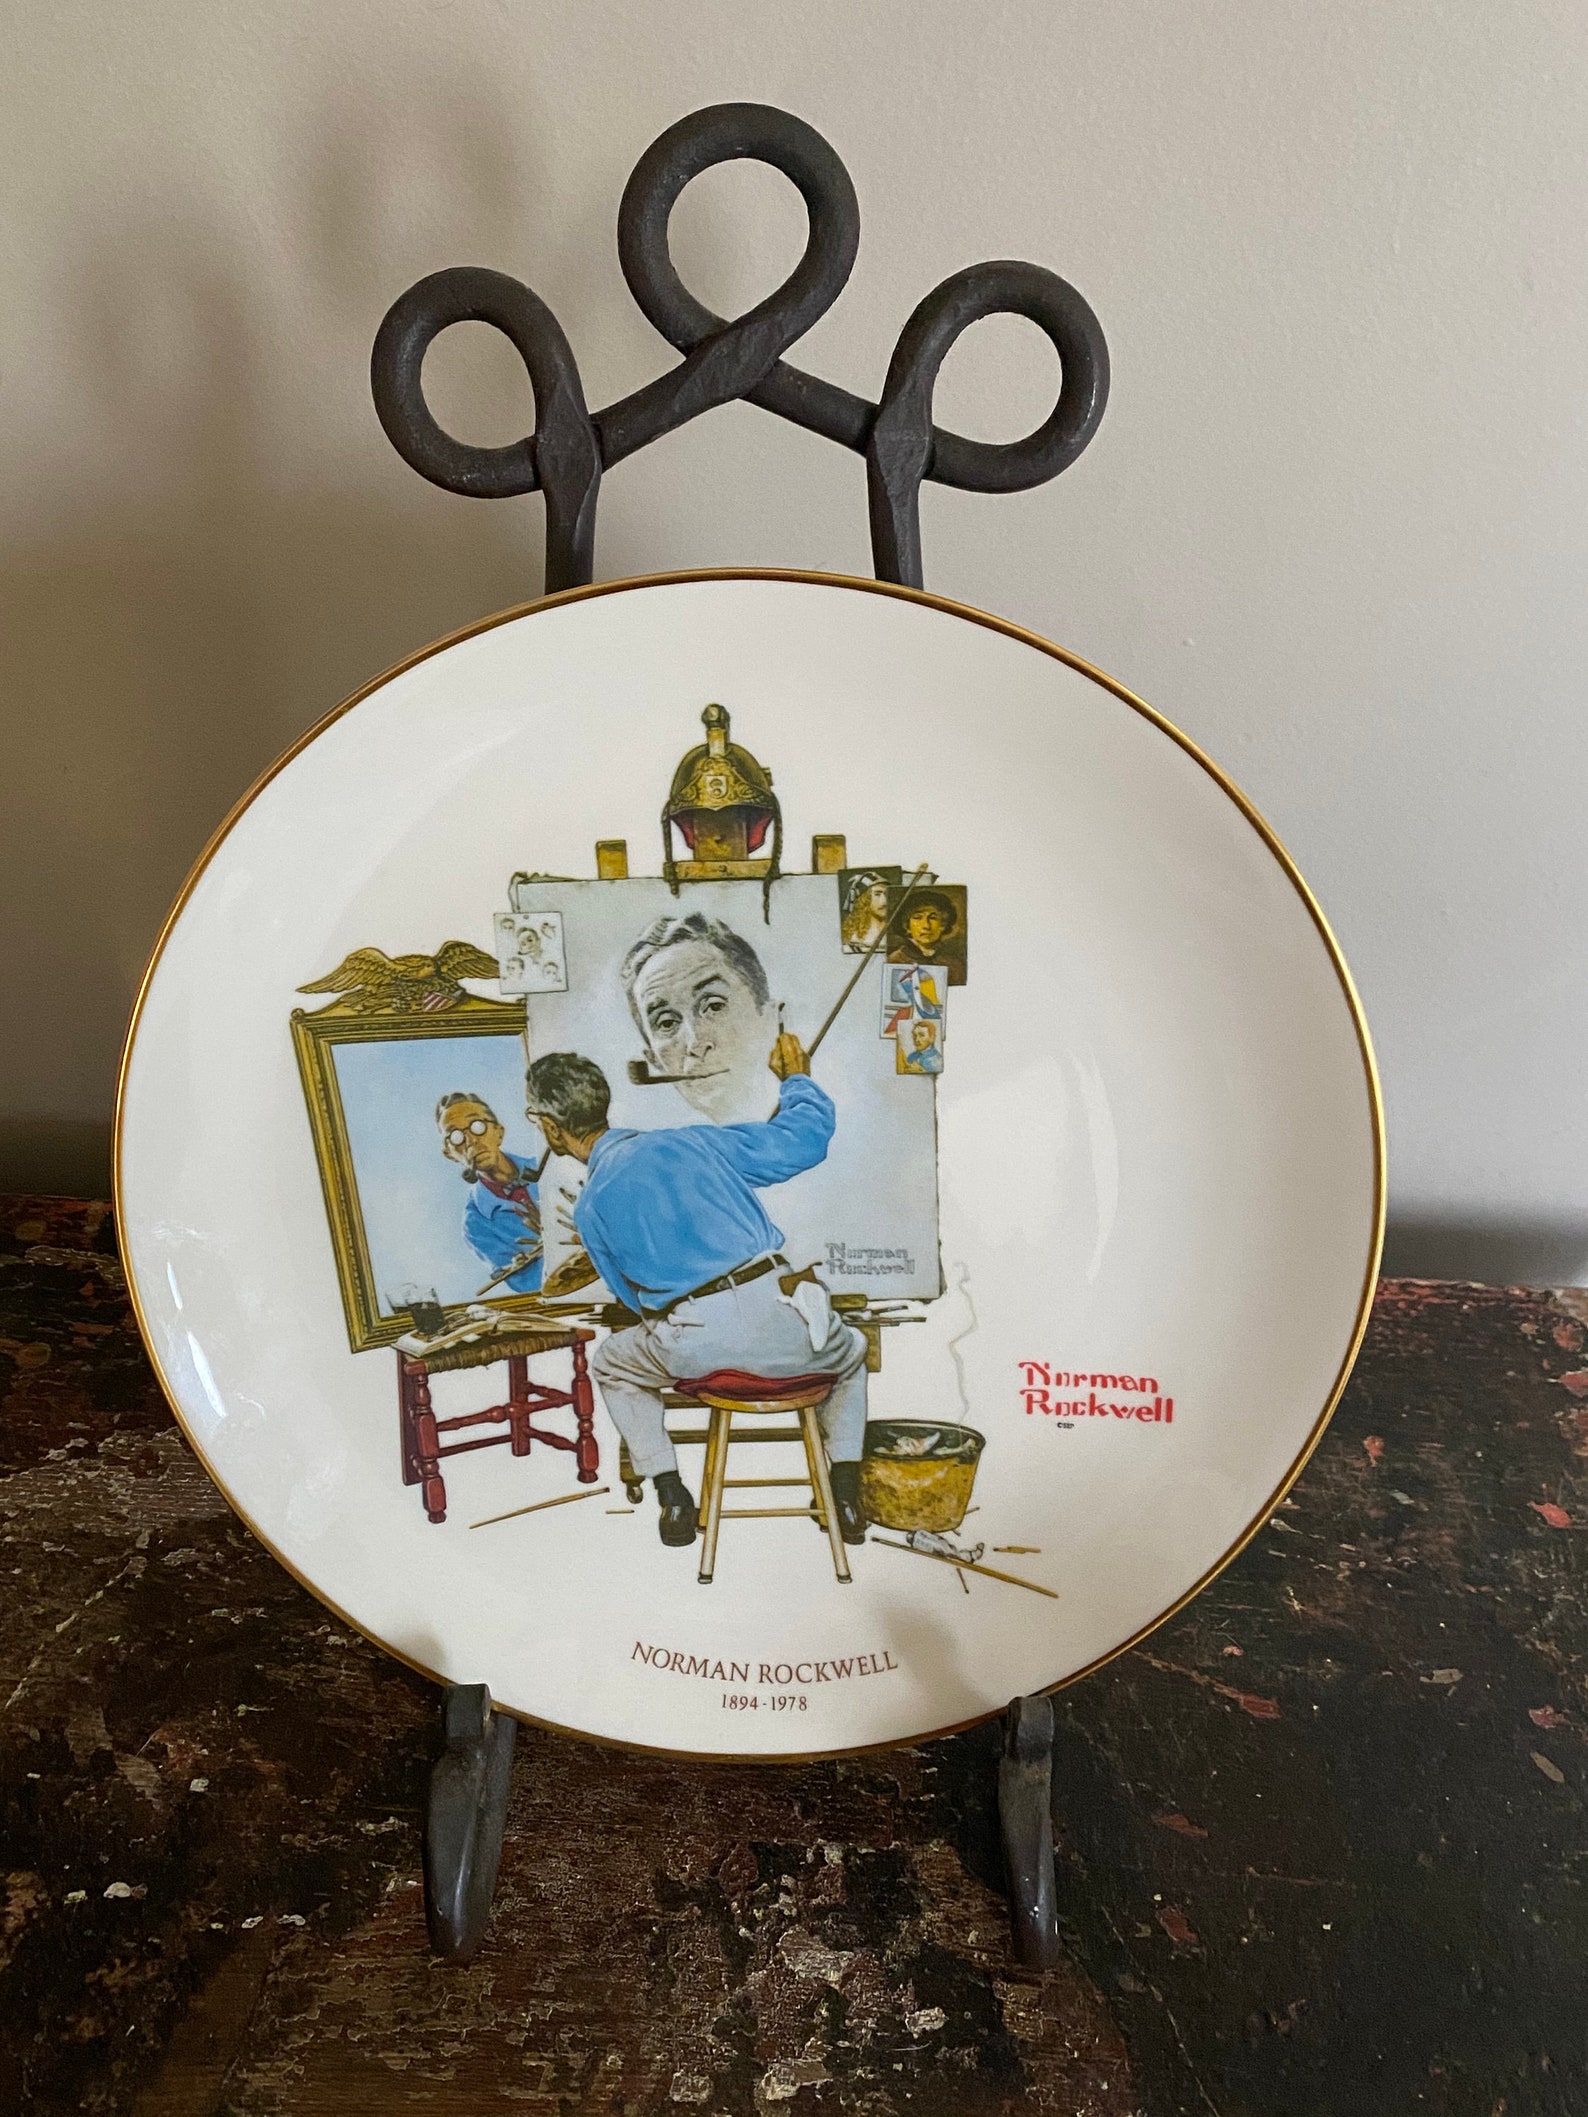 Limited Edition Four Seasons Norman Rockwell 1978 Collectors Plate The